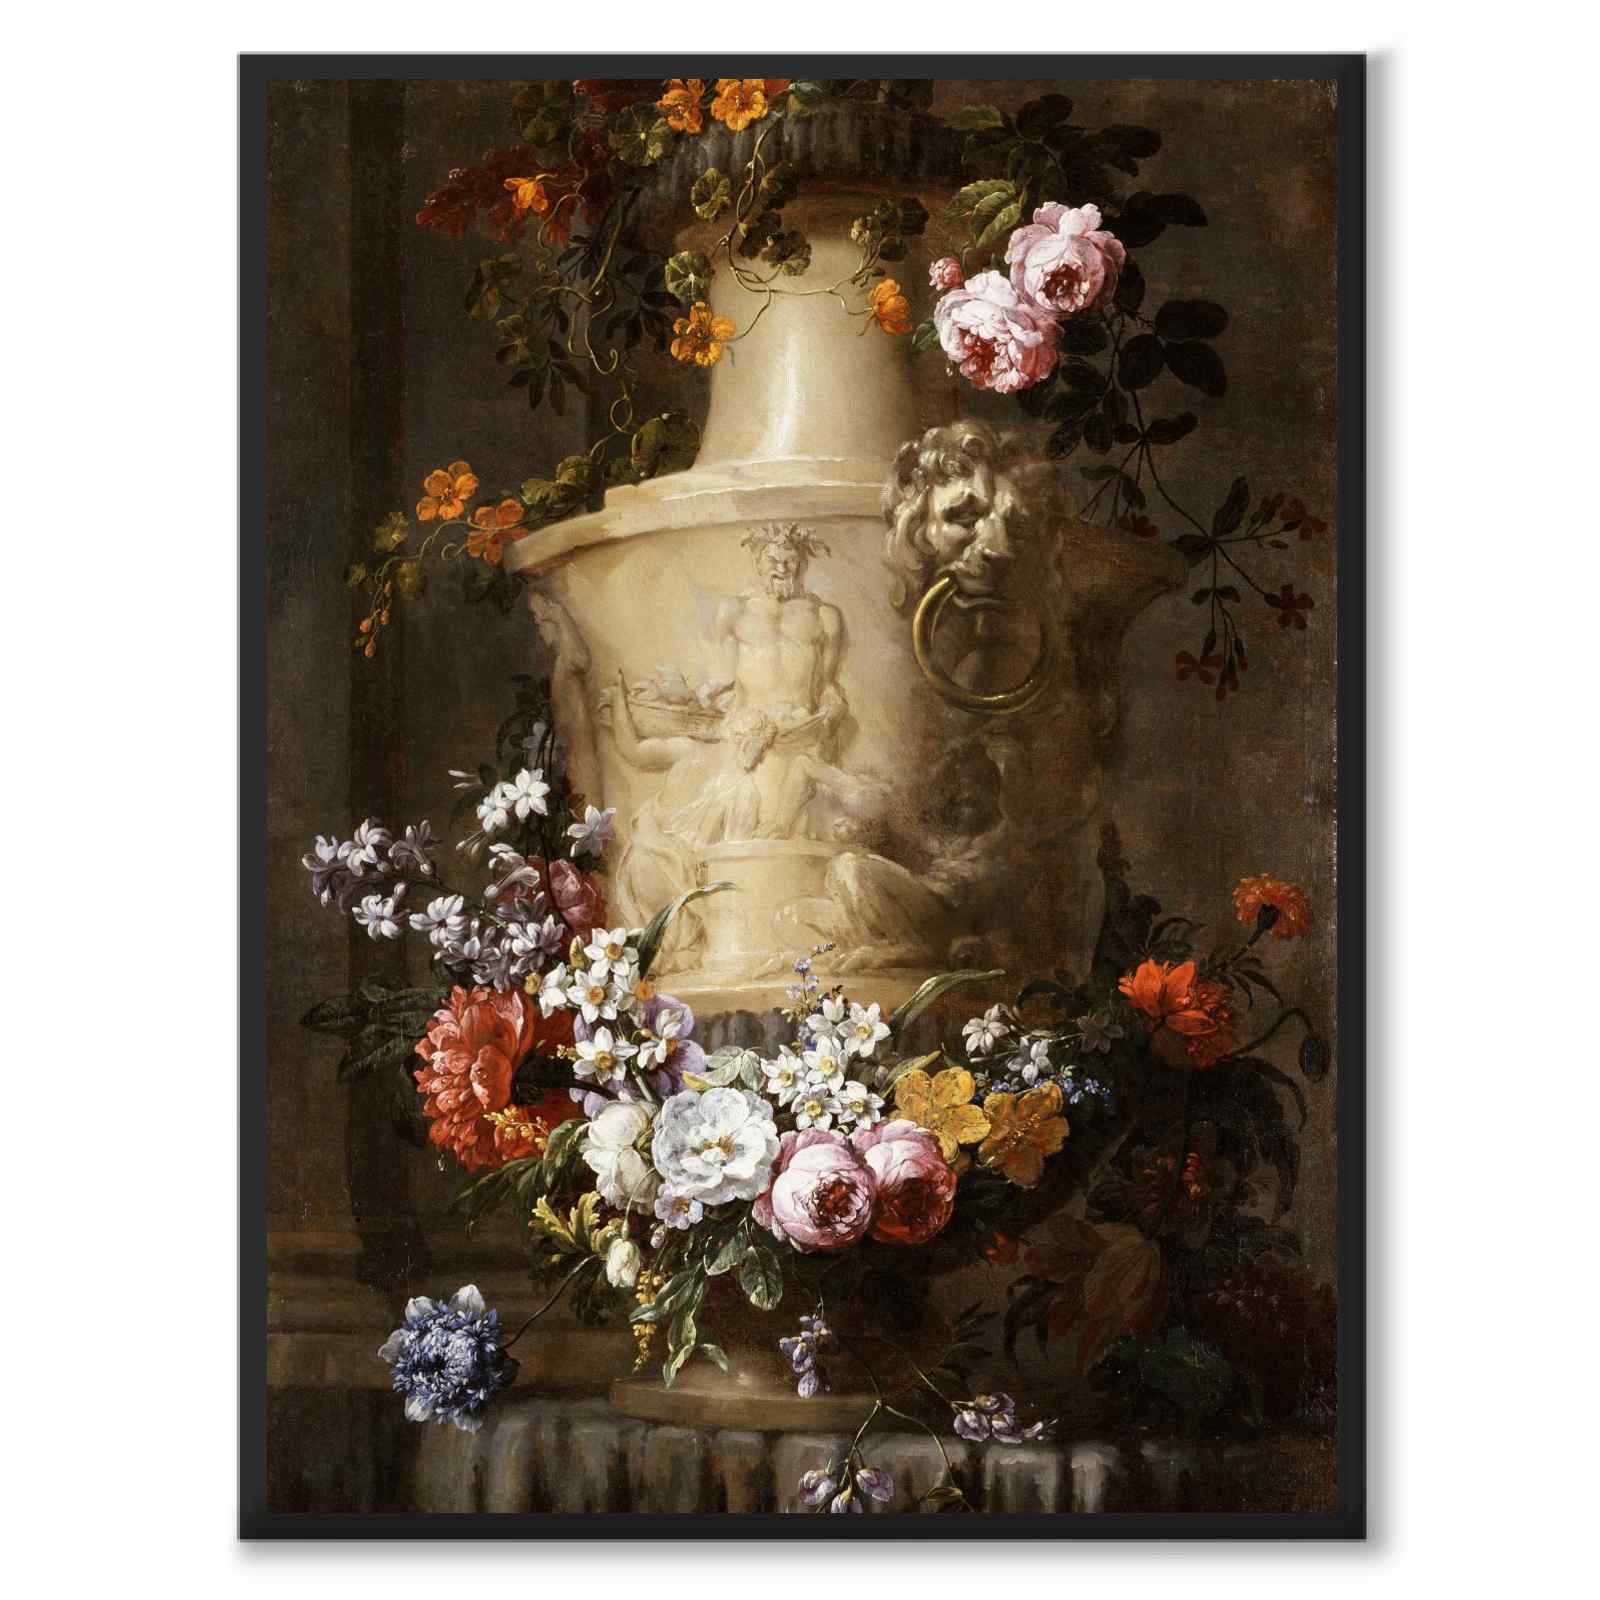 A Garland of Flowers - Poster